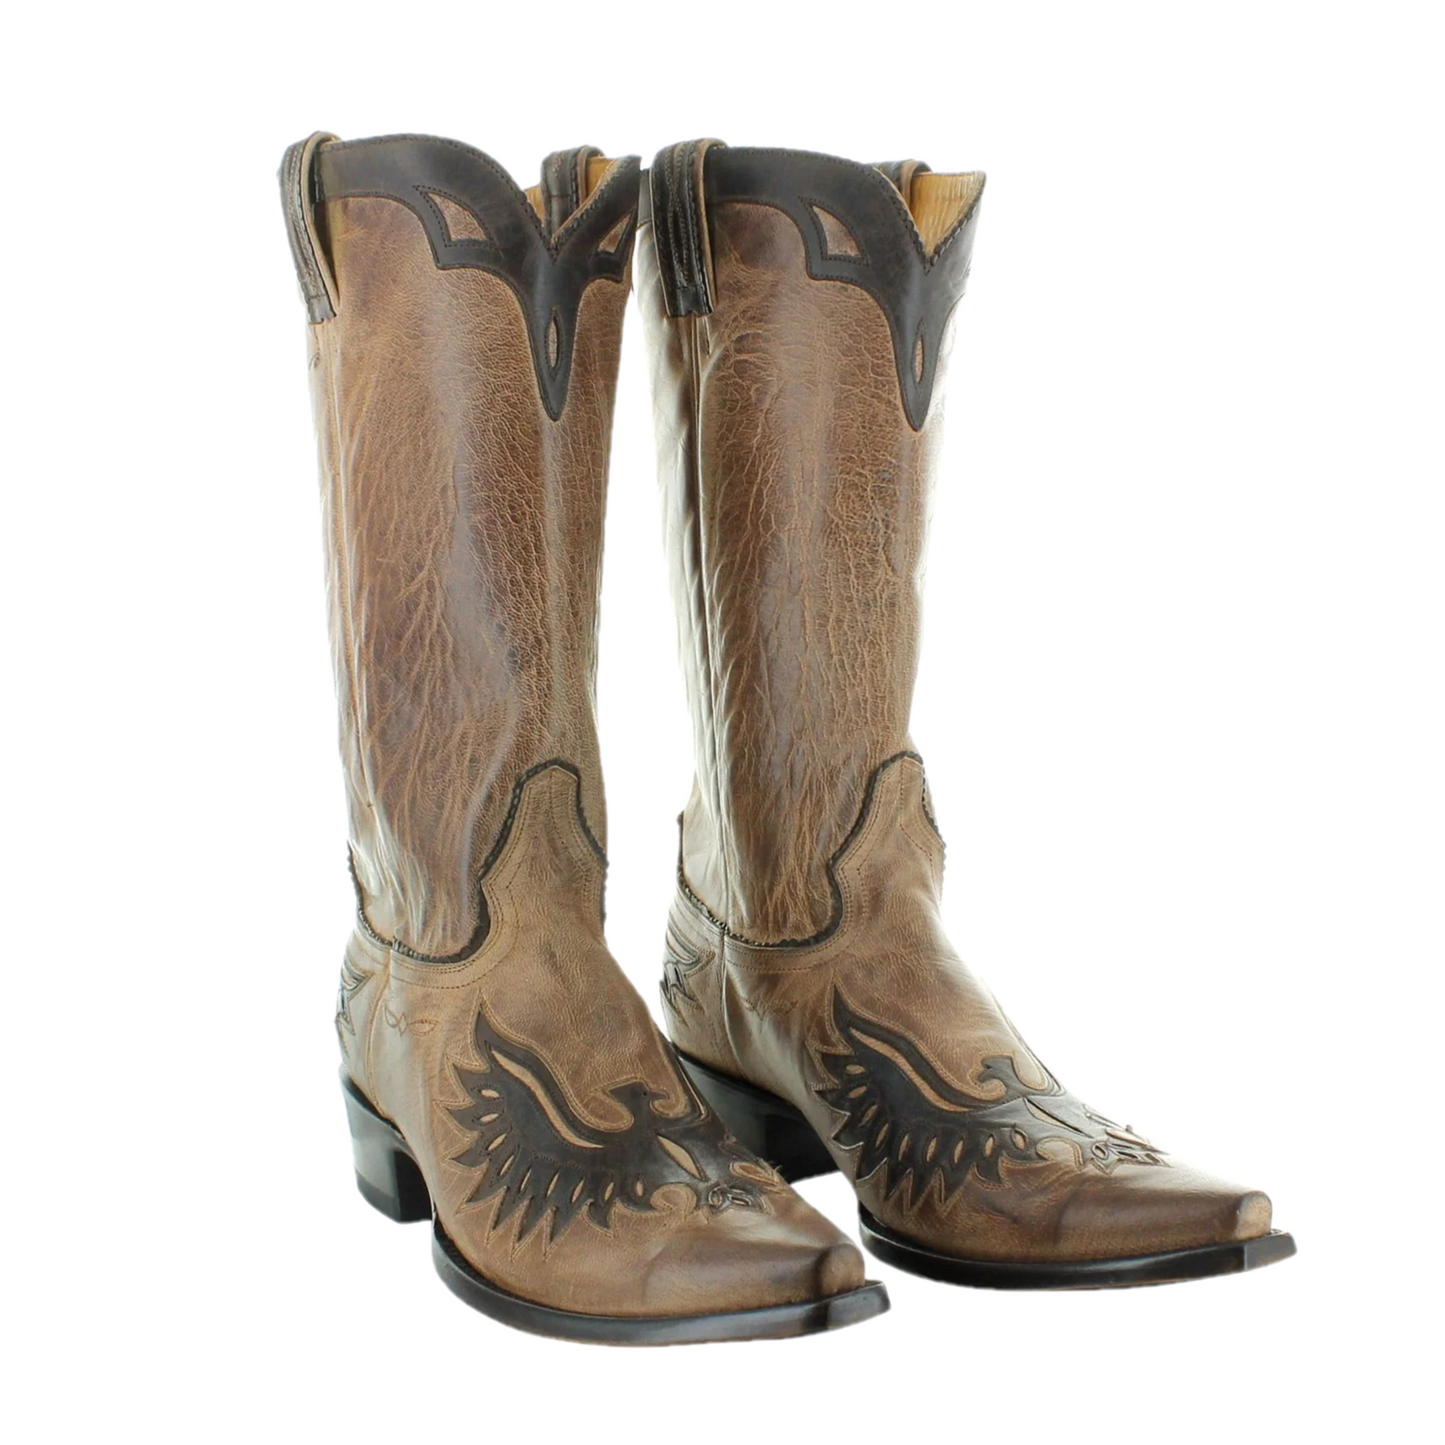 Old Gringo® Men's Eagle Inlay Tan Western Boots M535-47